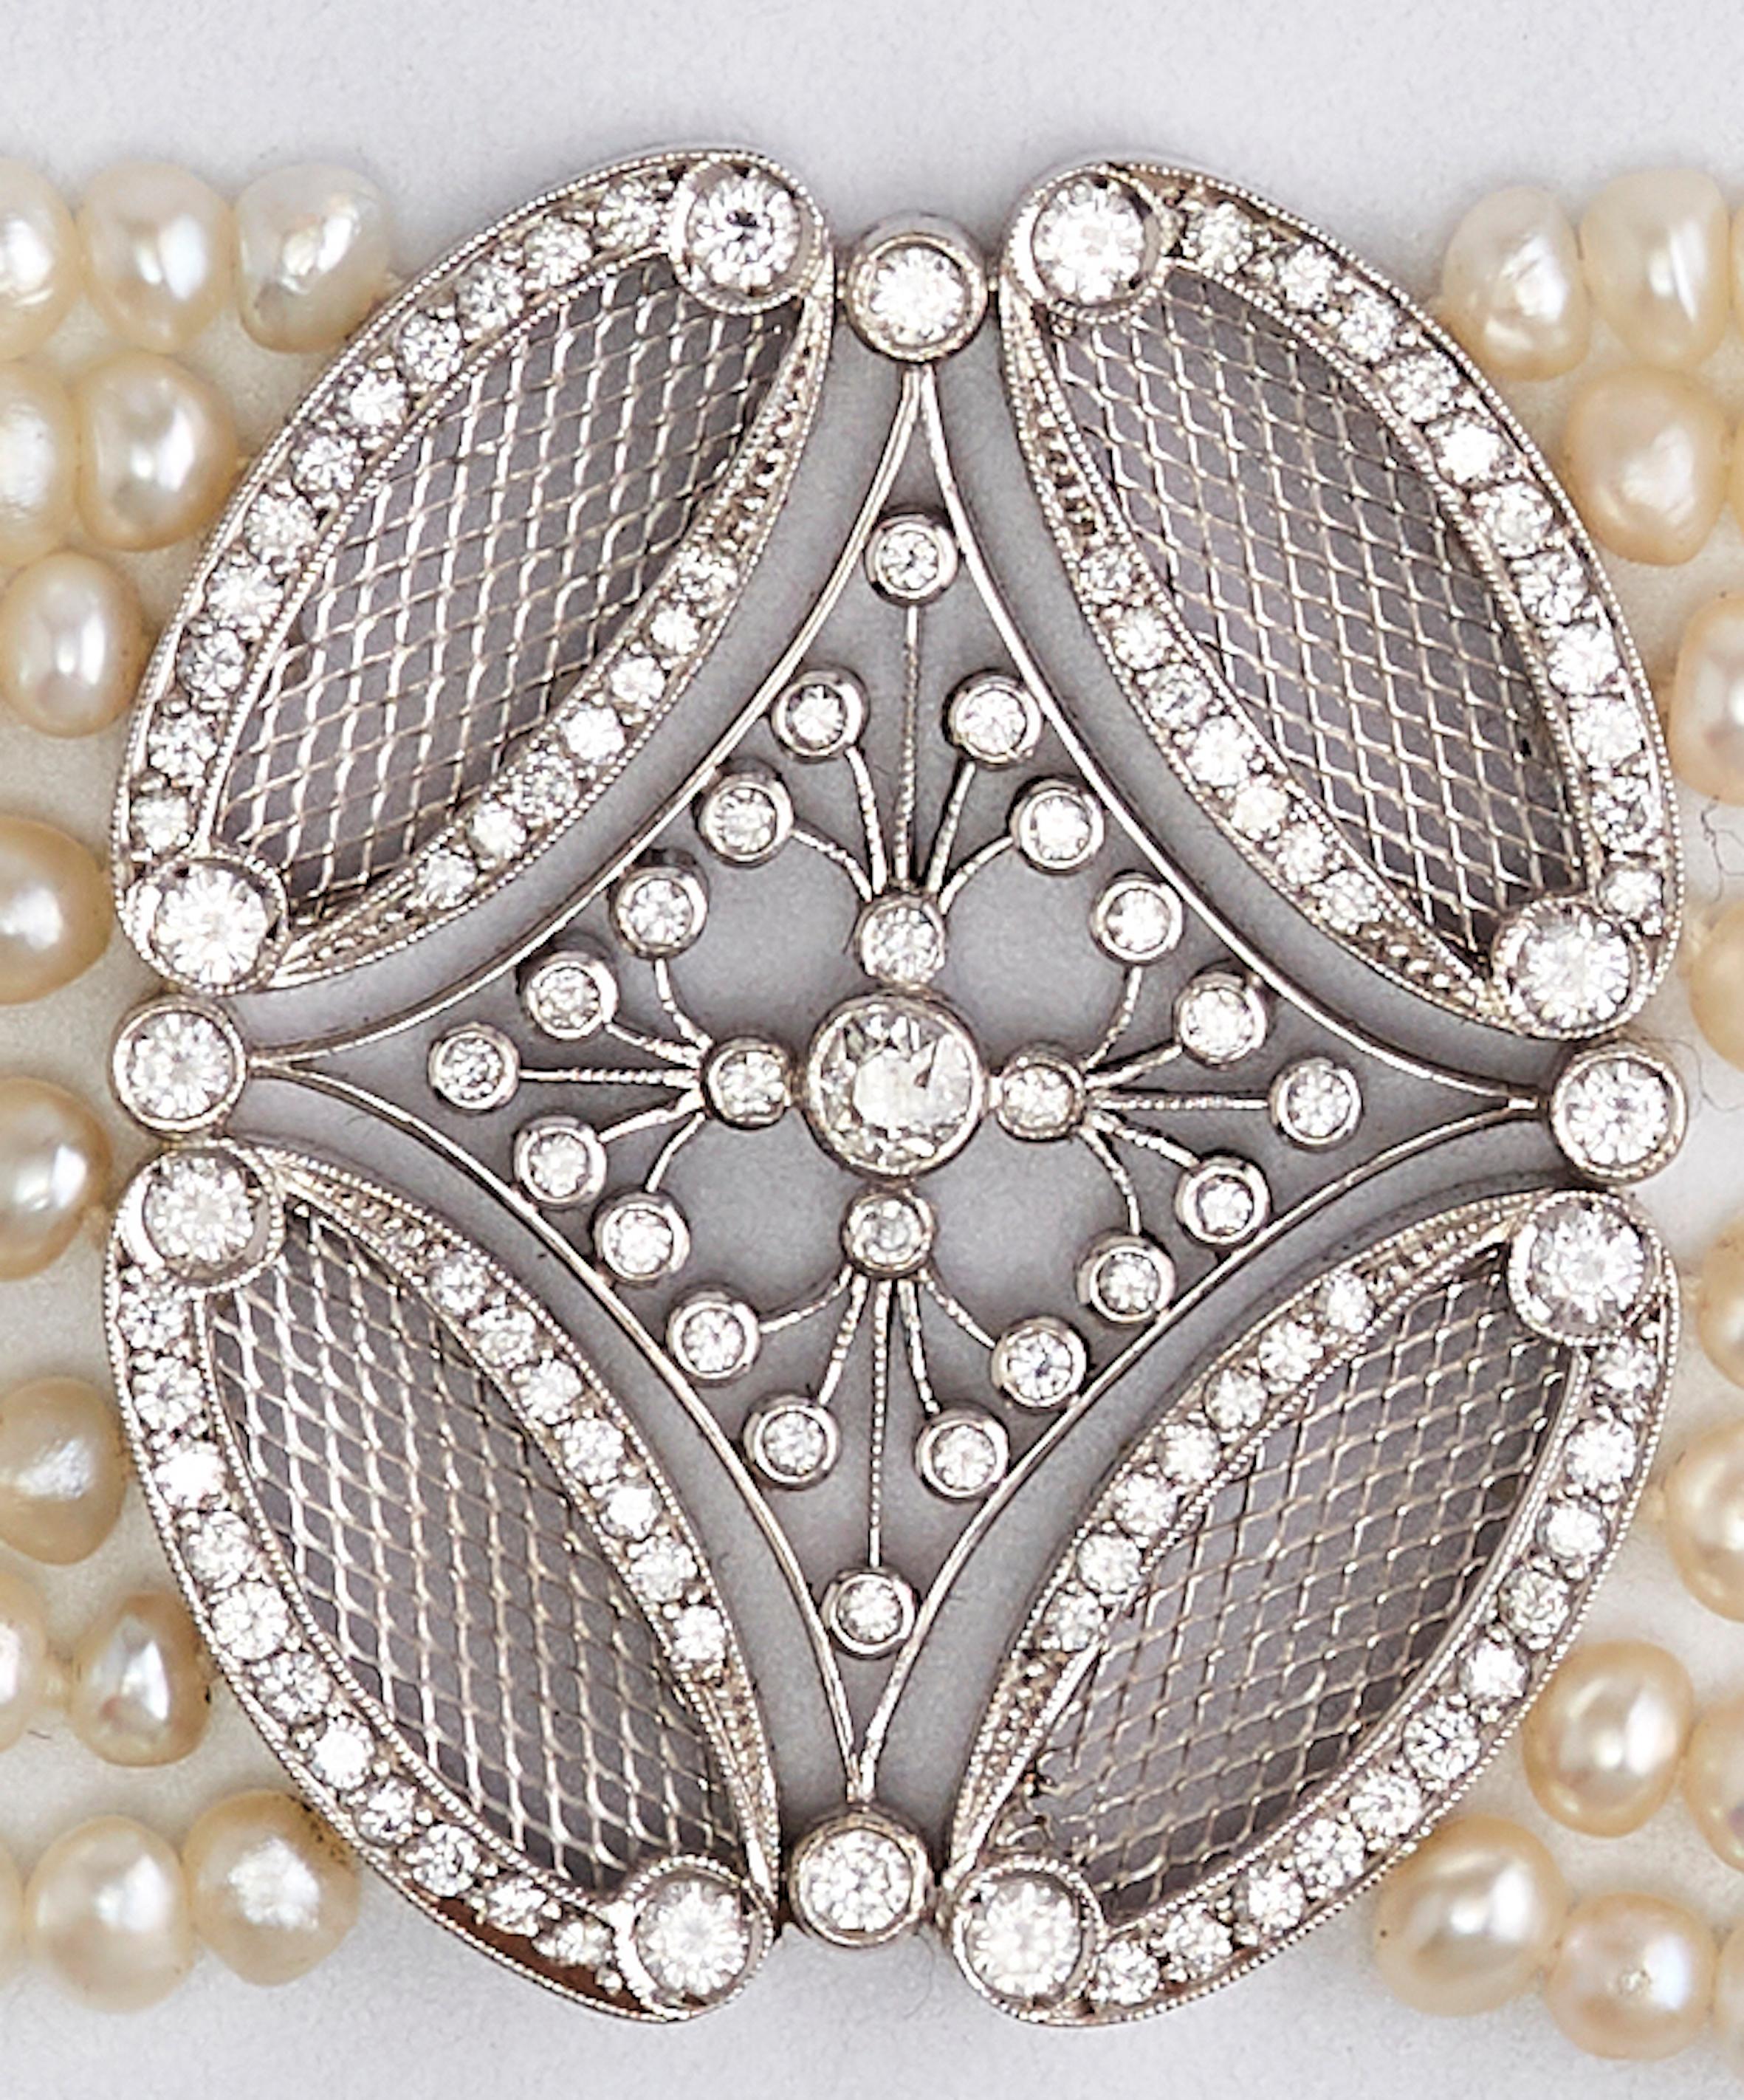 Bahrain Pearls Gold bracelet

Eight rows of gorgeous Bahrain pearls, attached to 5 lines of gold set with diamonds, and in the center of the bracelet a beautiful piece of white gold set with diamonds. 
Art deco from the 1930's in France. Total